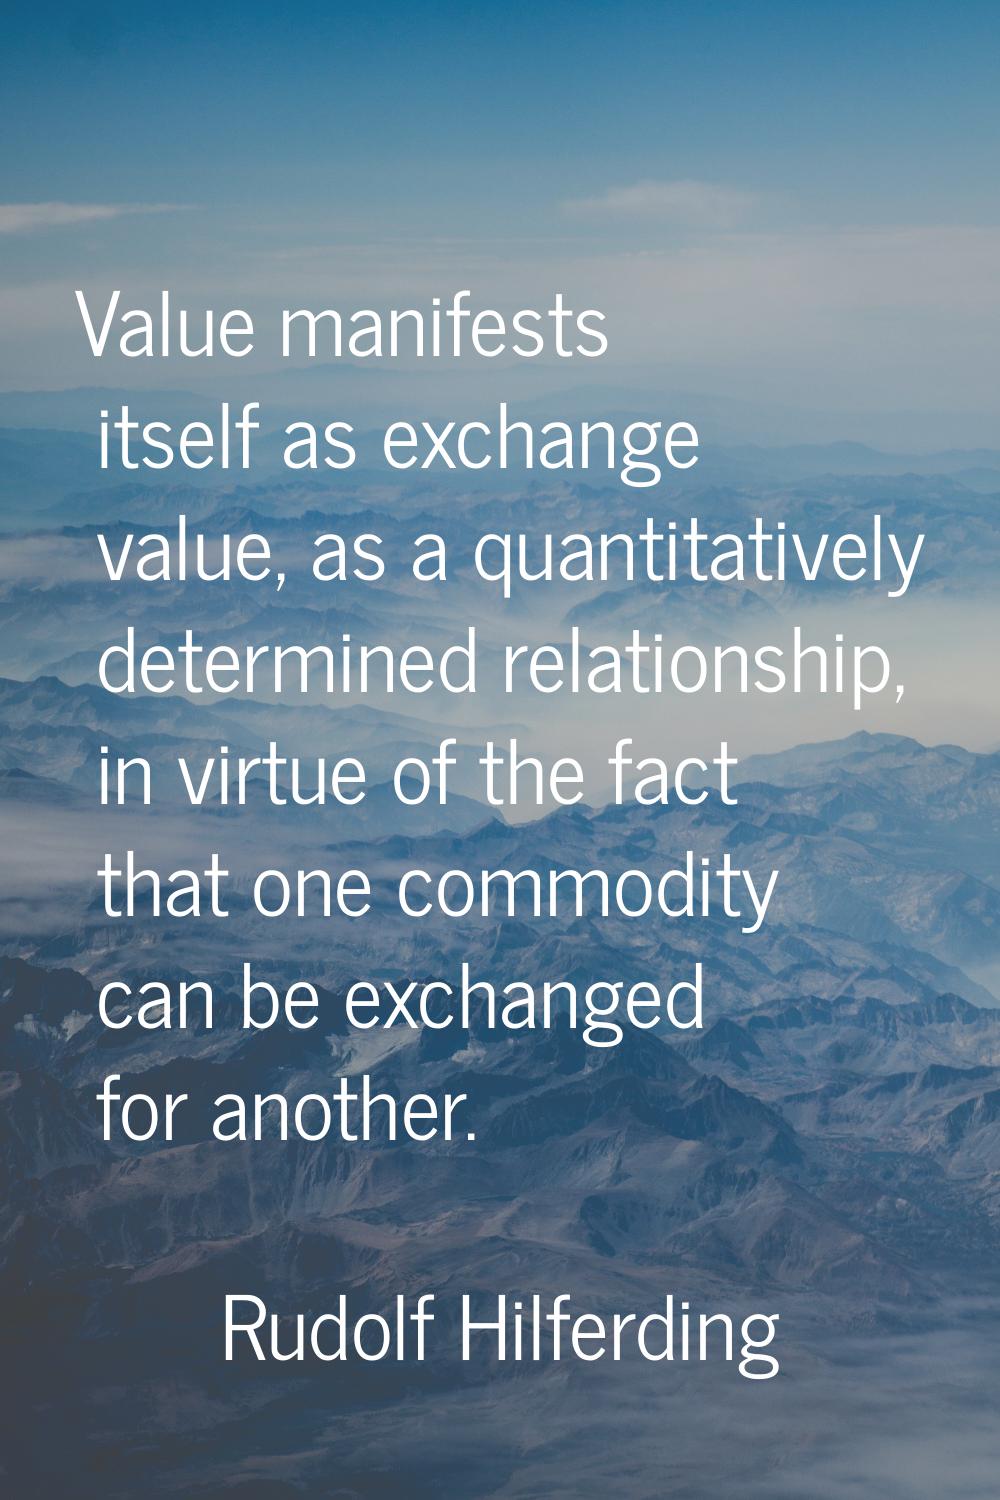 Value manifests itself as exchange value, as a quantitatively determined relationship, in virtue of